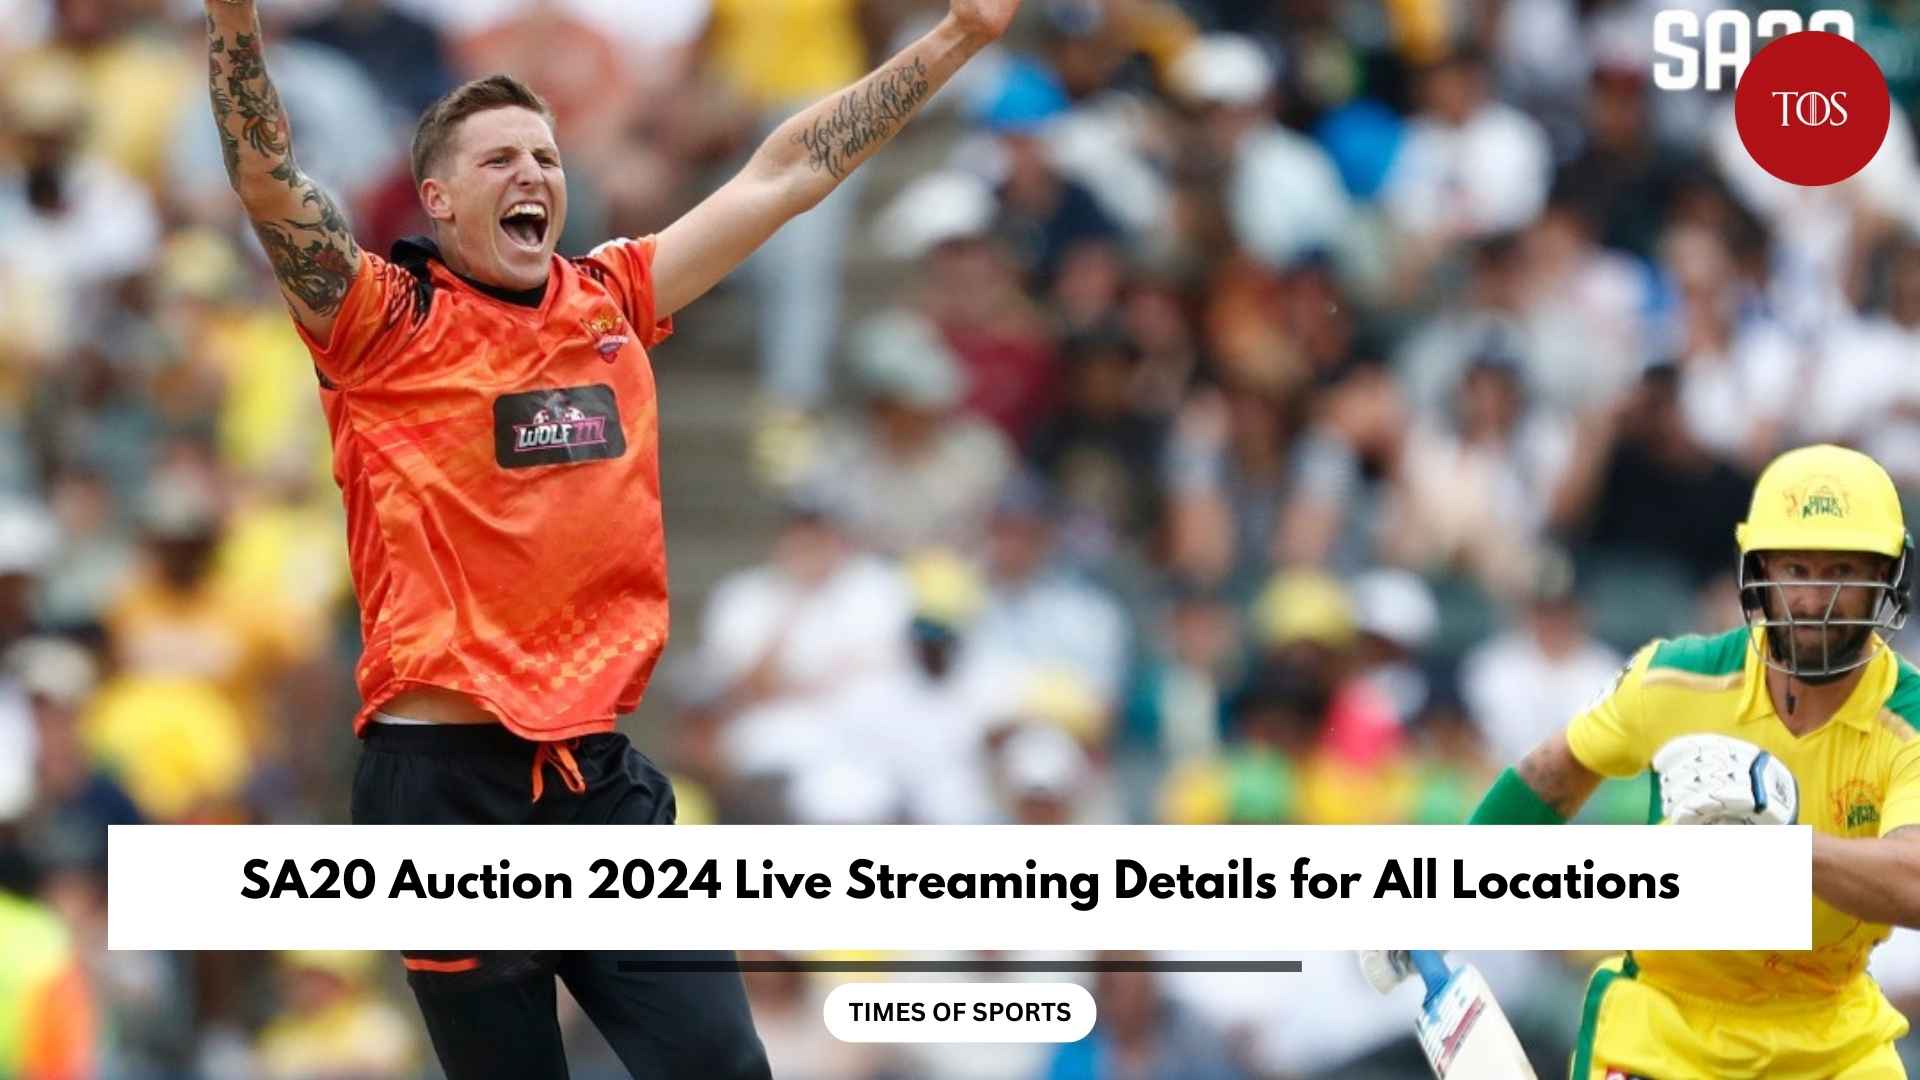 SA20 Auction 2024 Live Streaming Details for All Locations